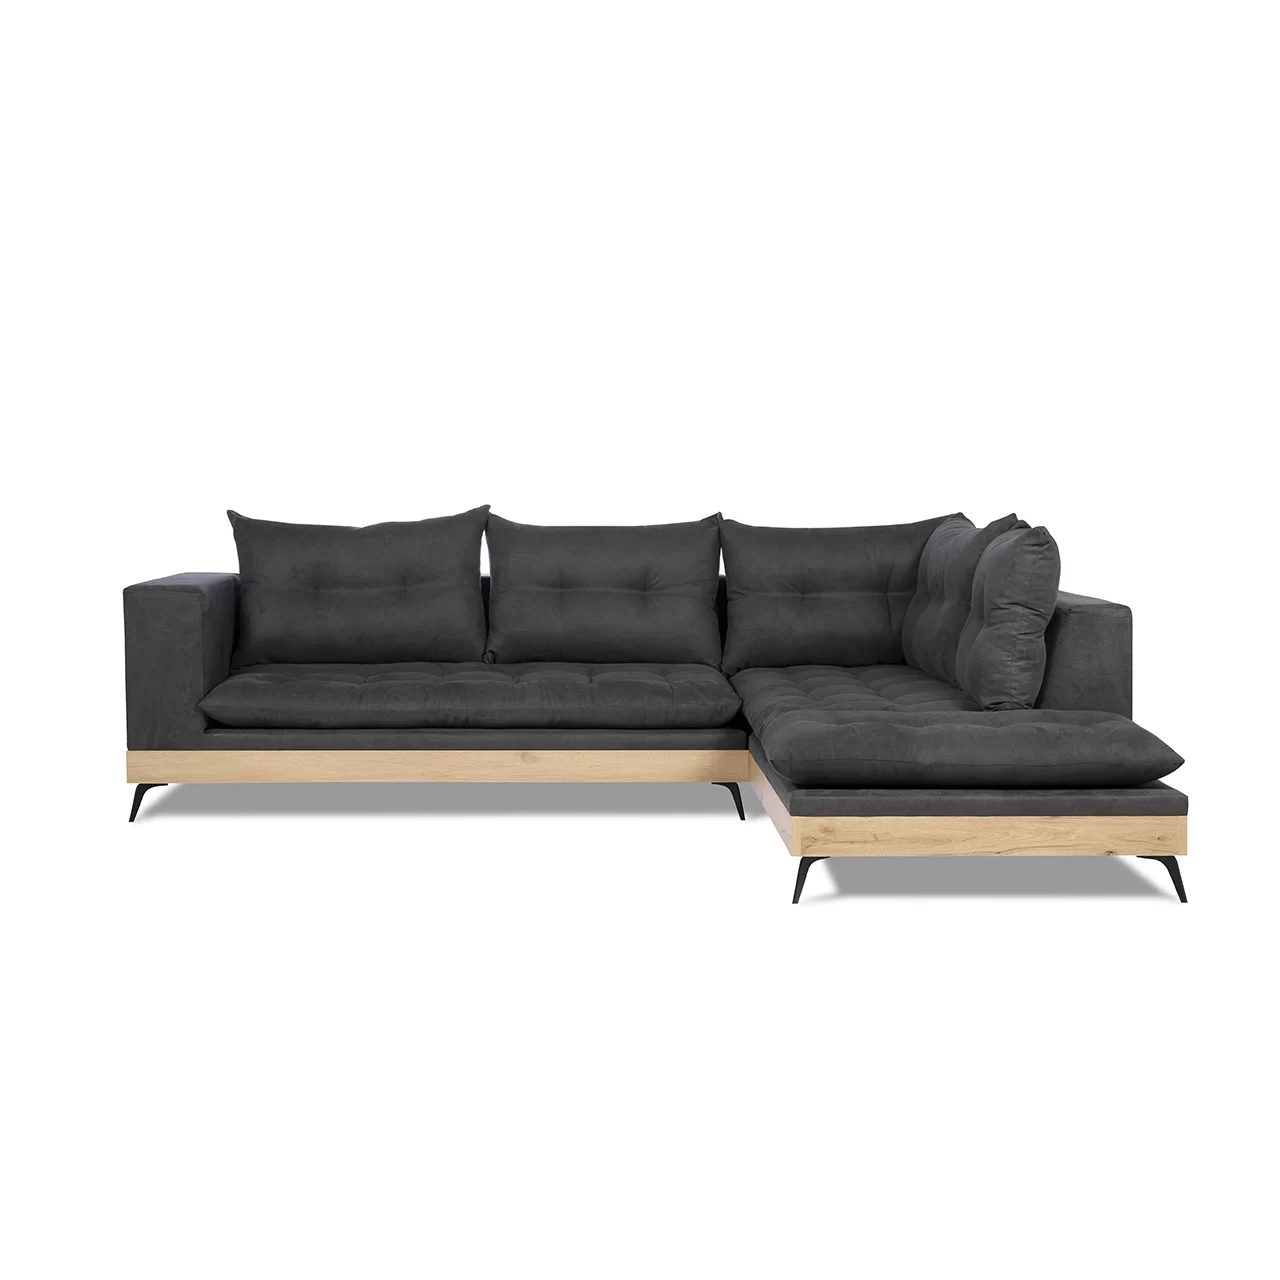 a big black sectional couch sofa